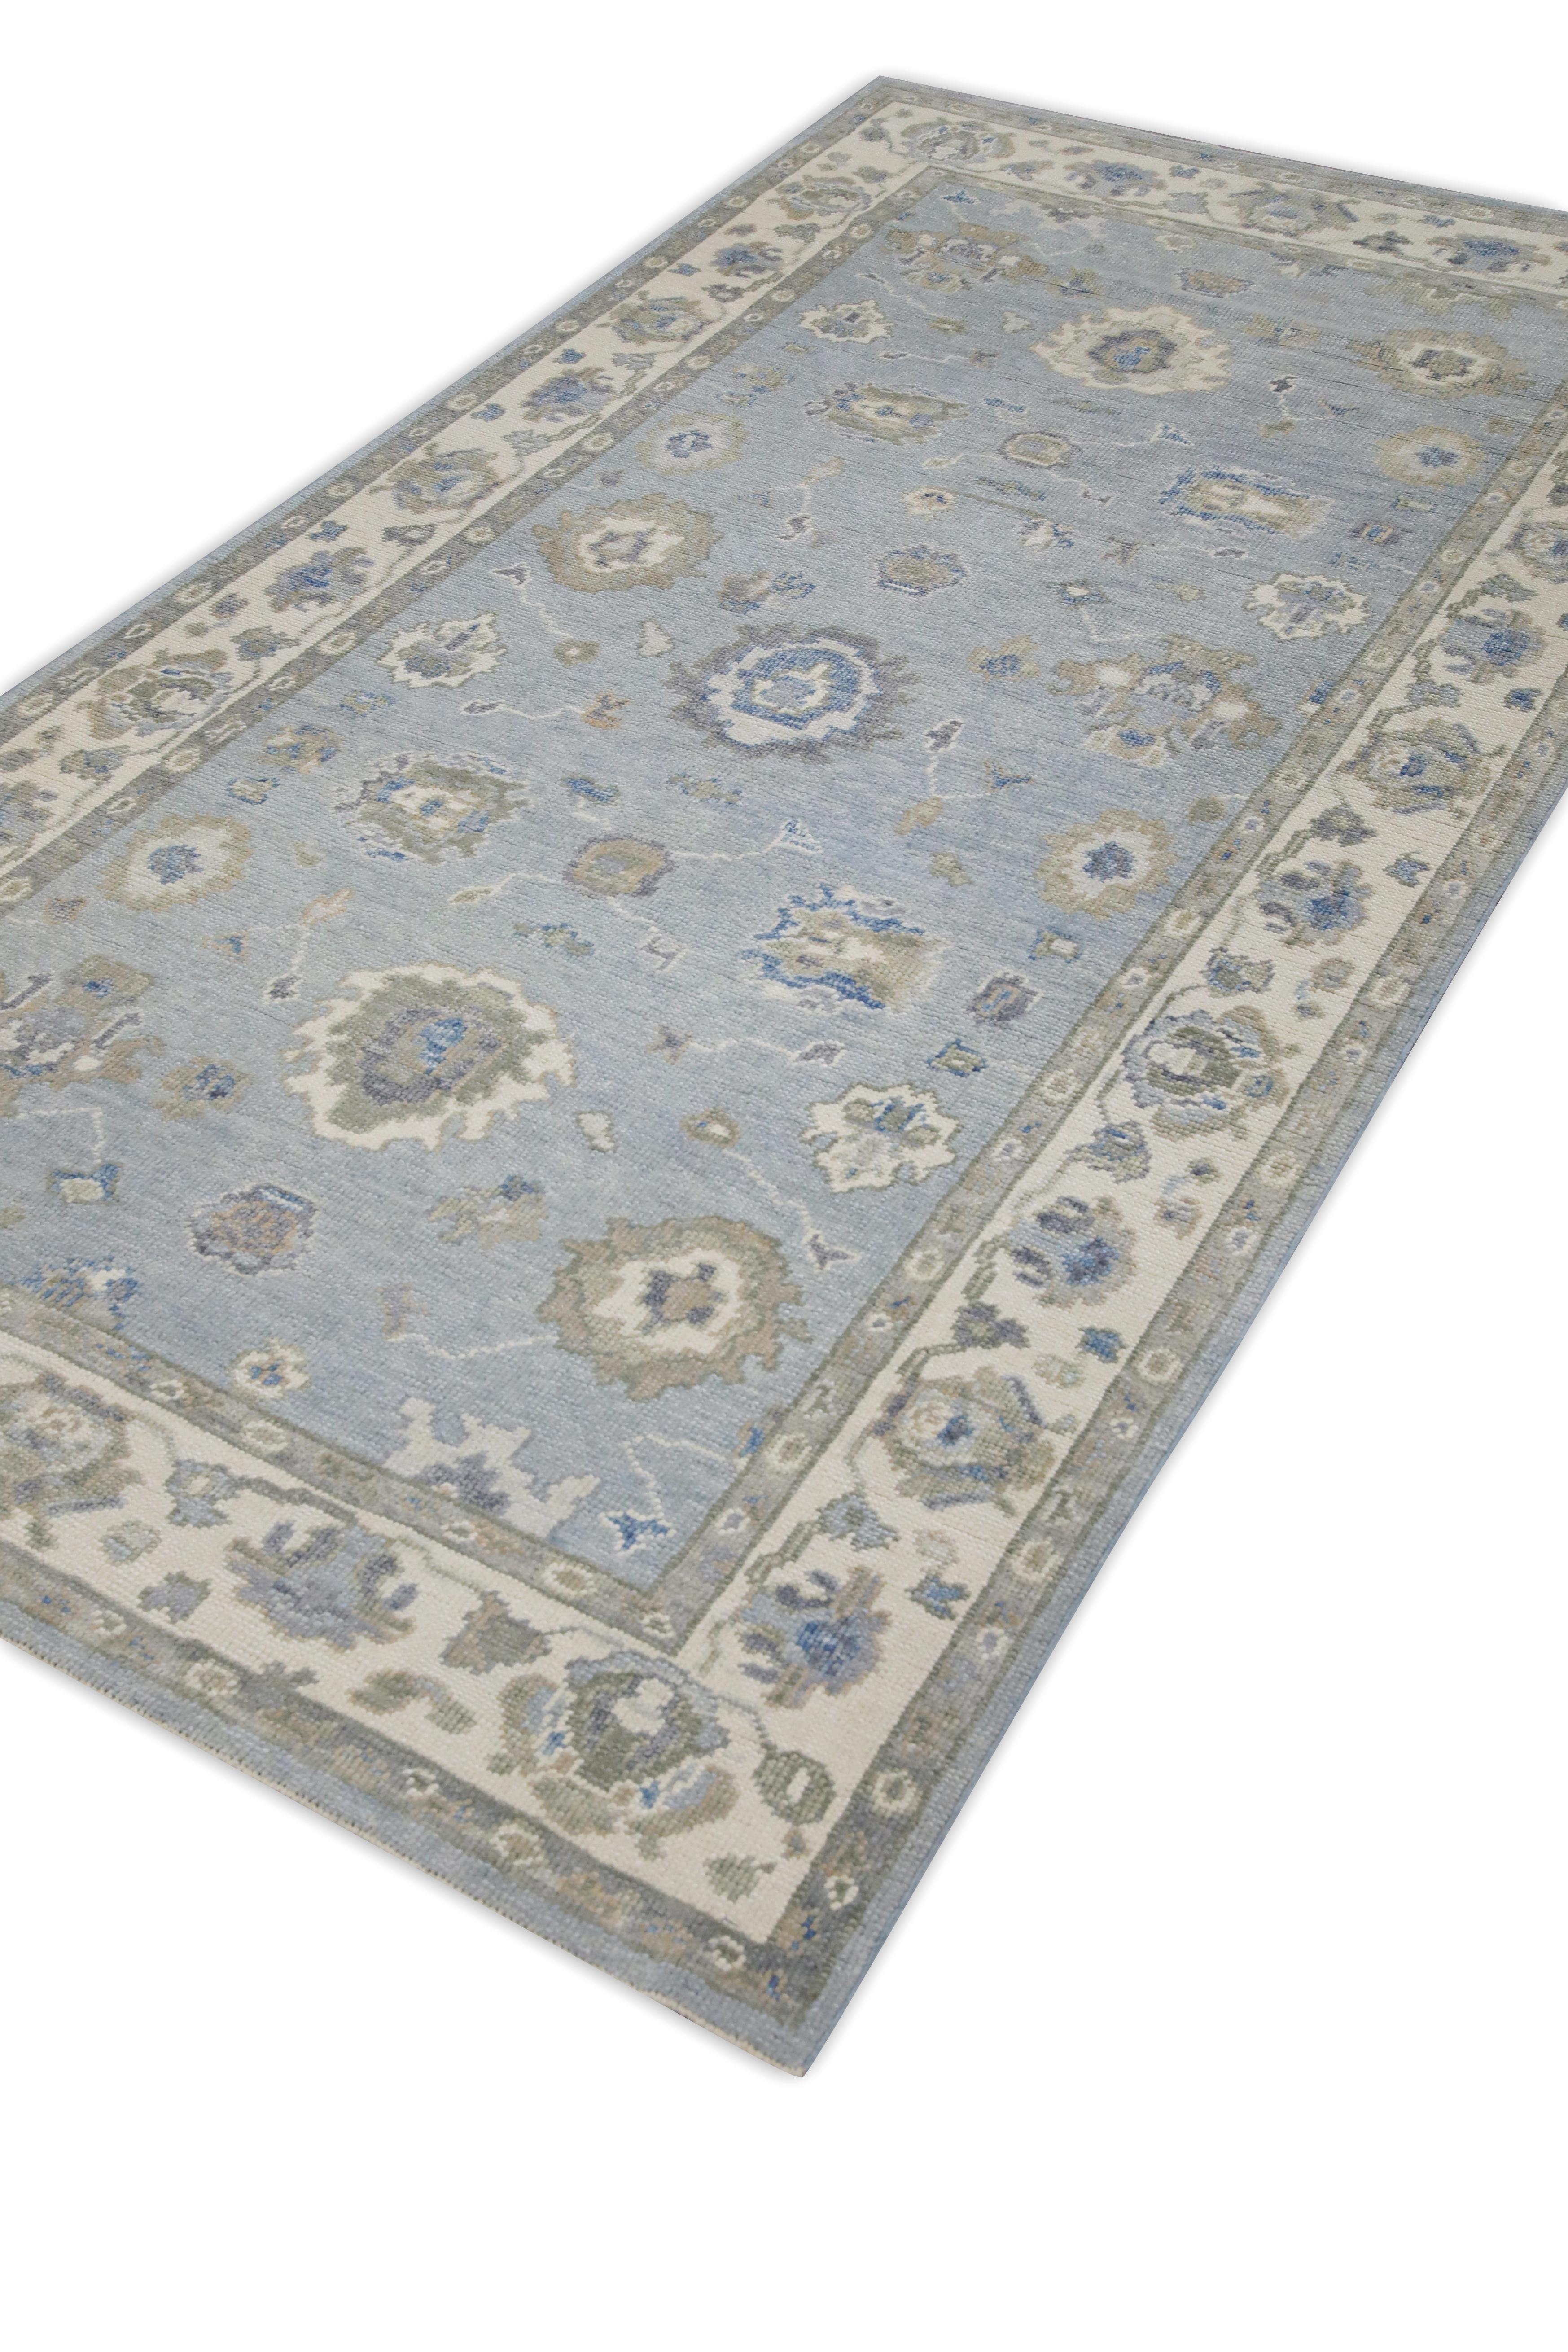 Contemporary Blue Colorful Floral Design Handwoven Wool Turkish Oushak Rug 5' X 9'6